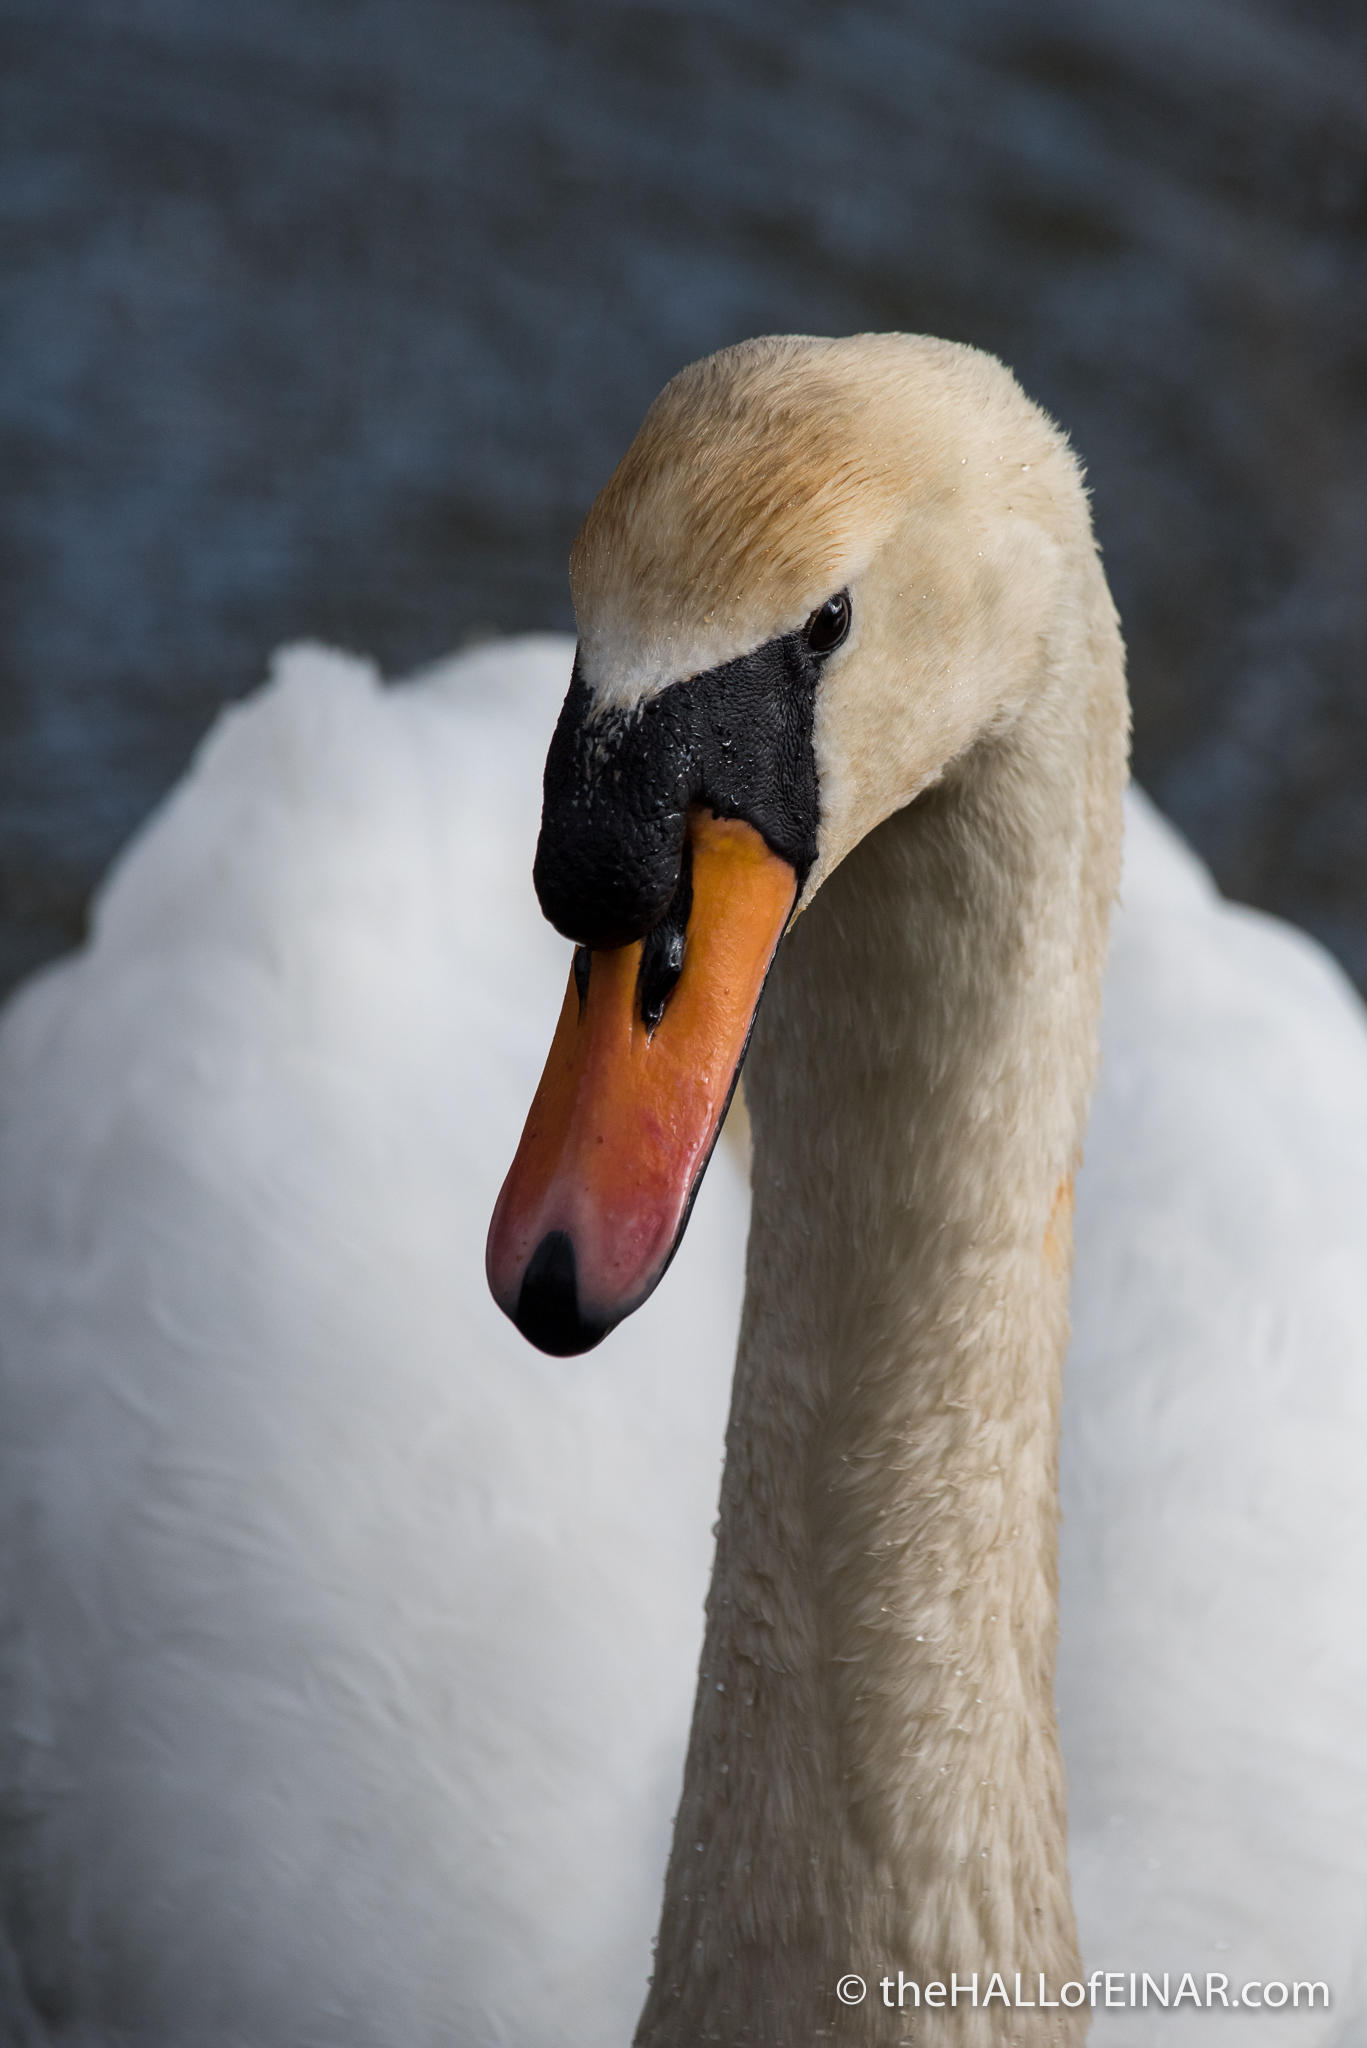 Mute Swan - Stover - The Hall of Einar - photograph (c) David Bailey (not the)